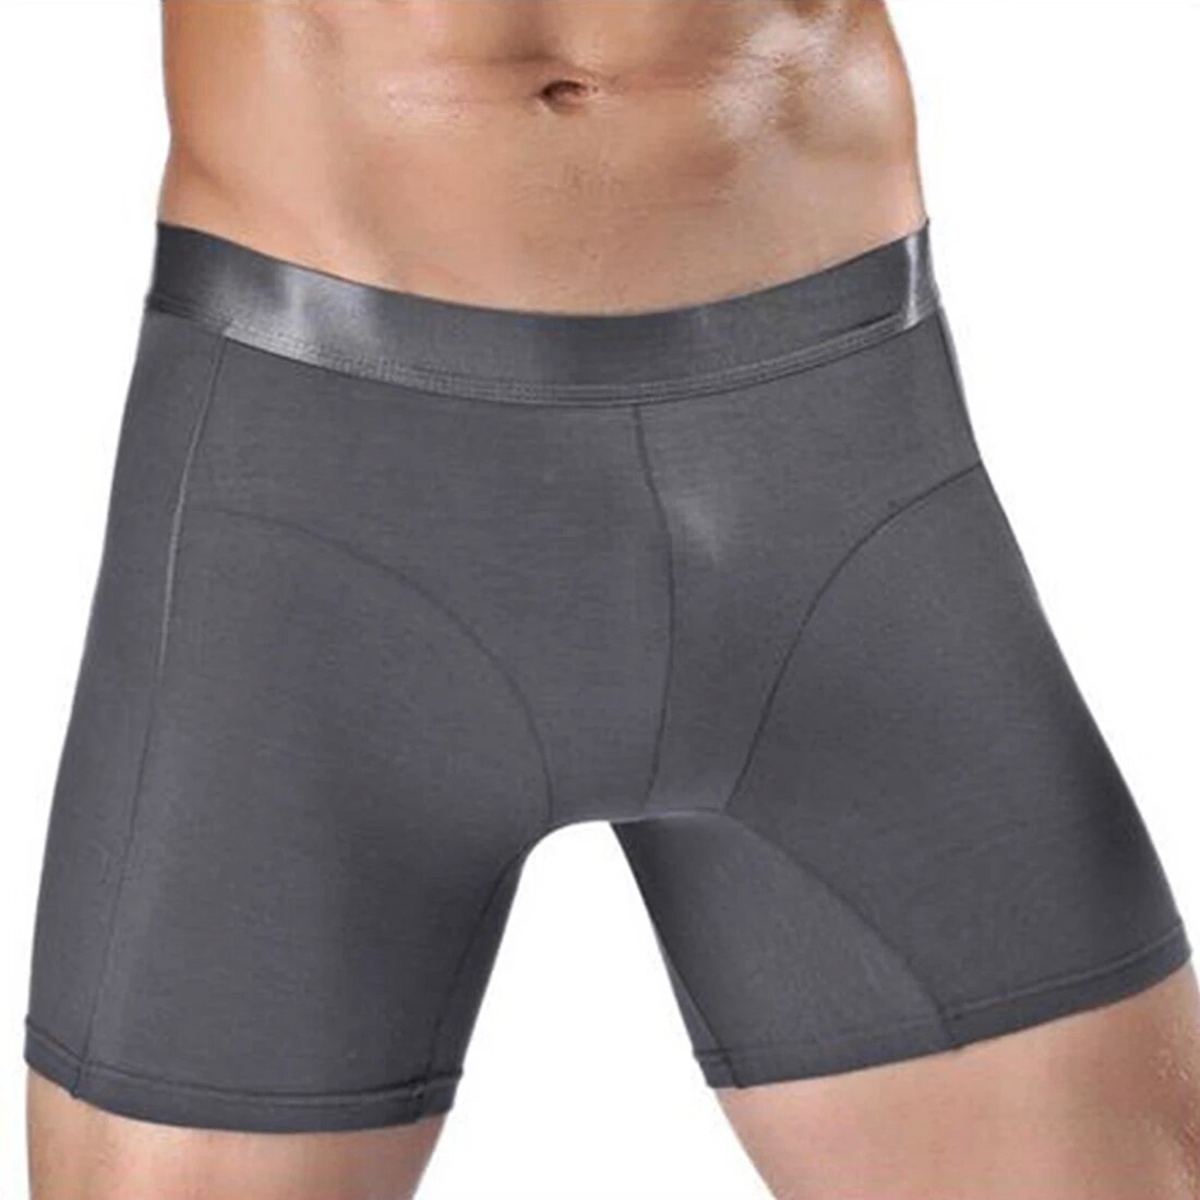 15 Incredible Men’s Cotton Compression Shorts For 2023